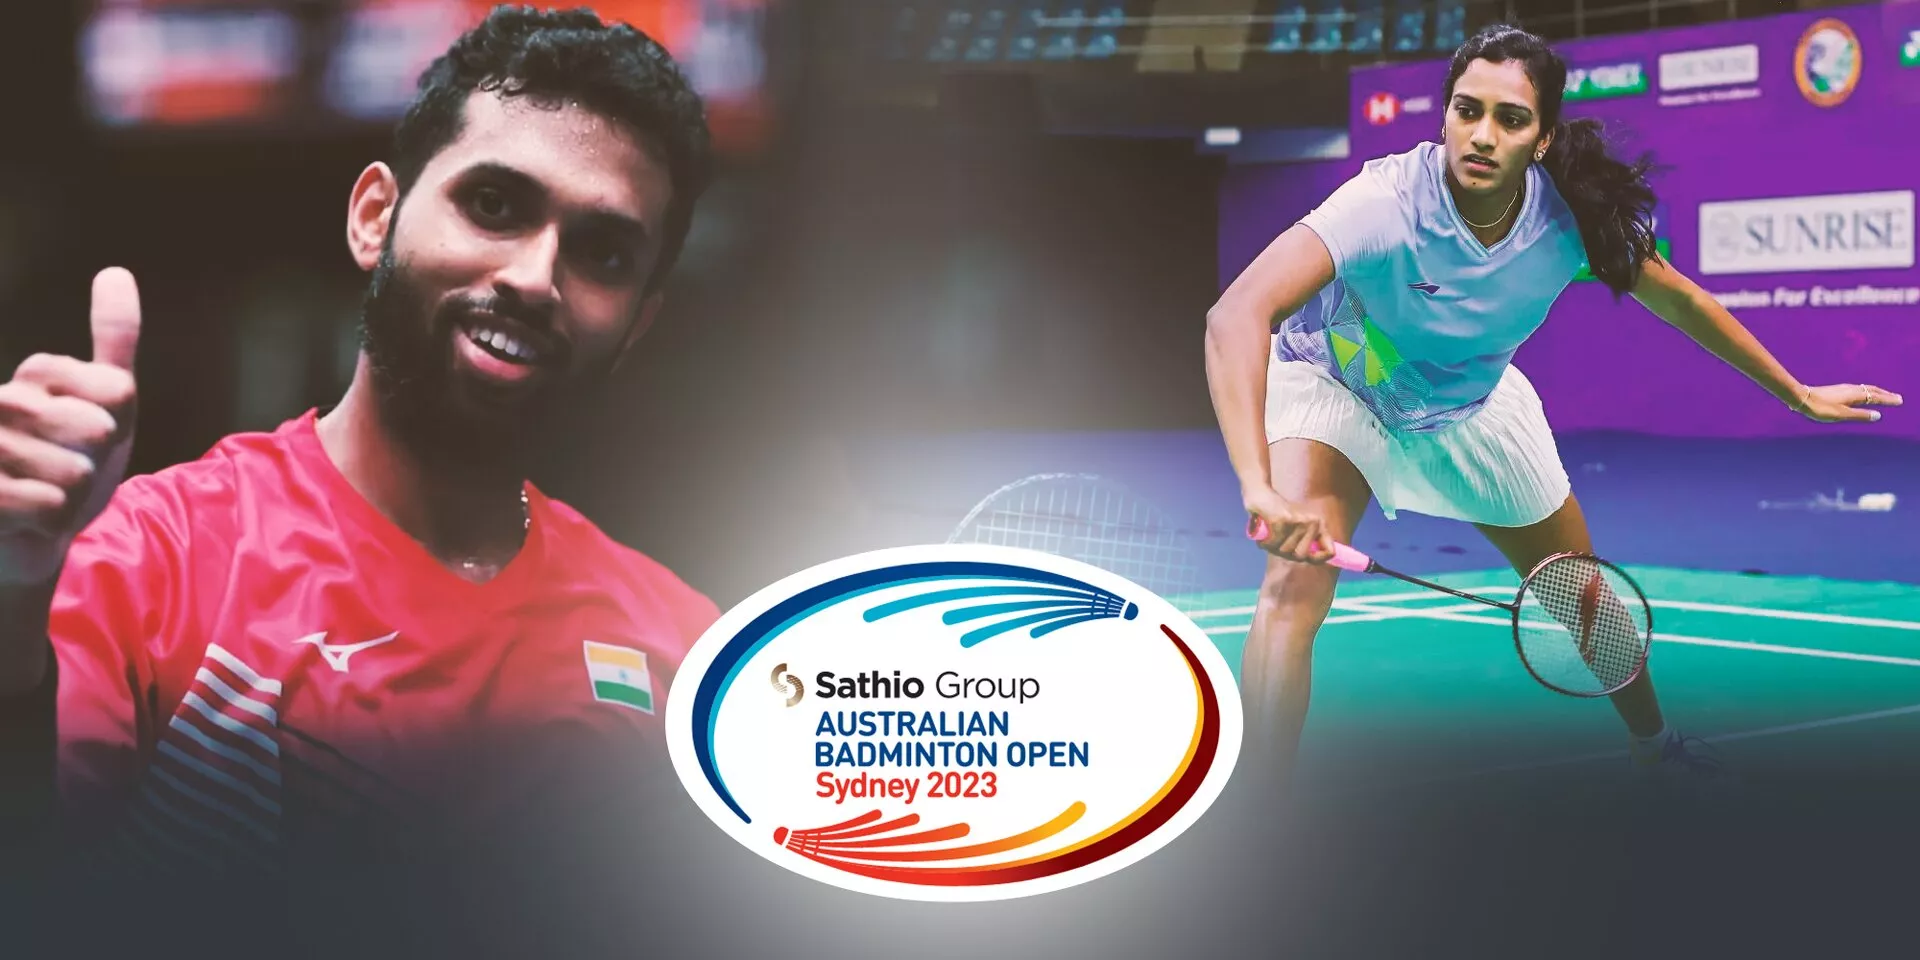 Australian Open 2023 Updated Schedule, fixtures, results and live-streaming details